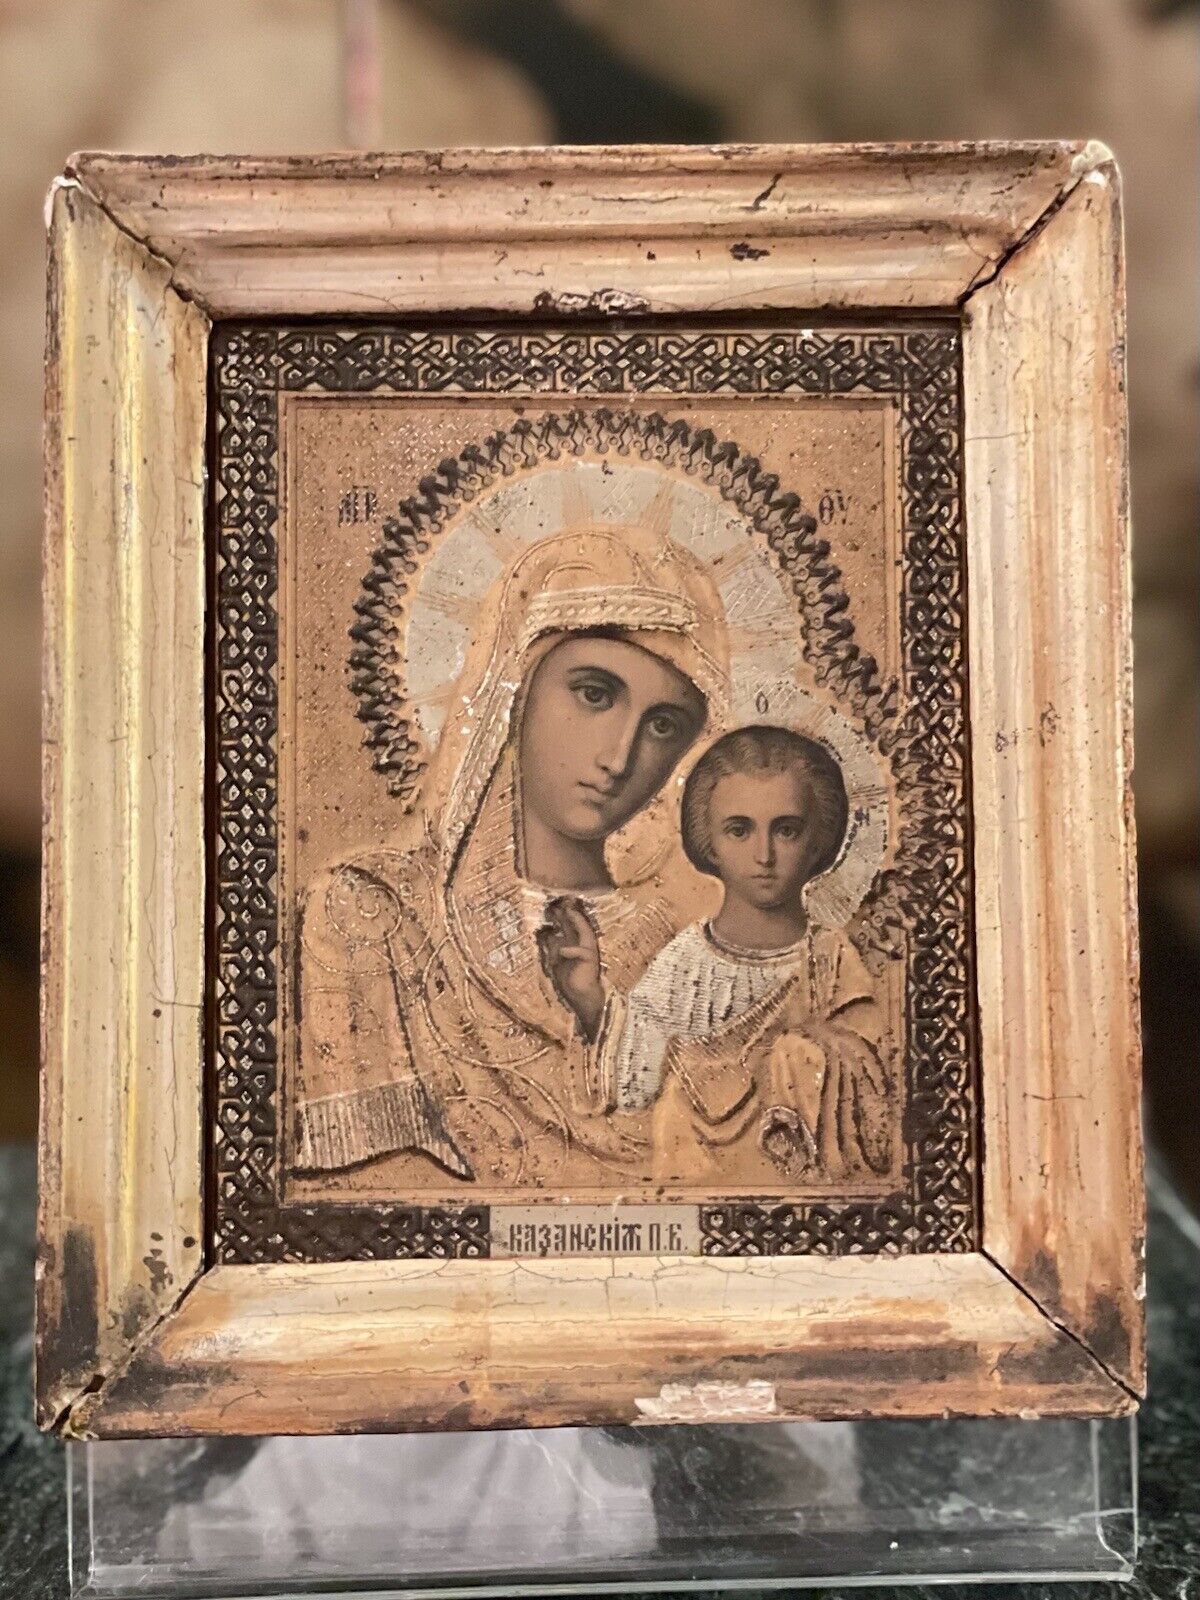 ANTIQUE FRAMED GILDED ICON MADONNA AND CHILD THEOTOKOS  20TH CENTURY